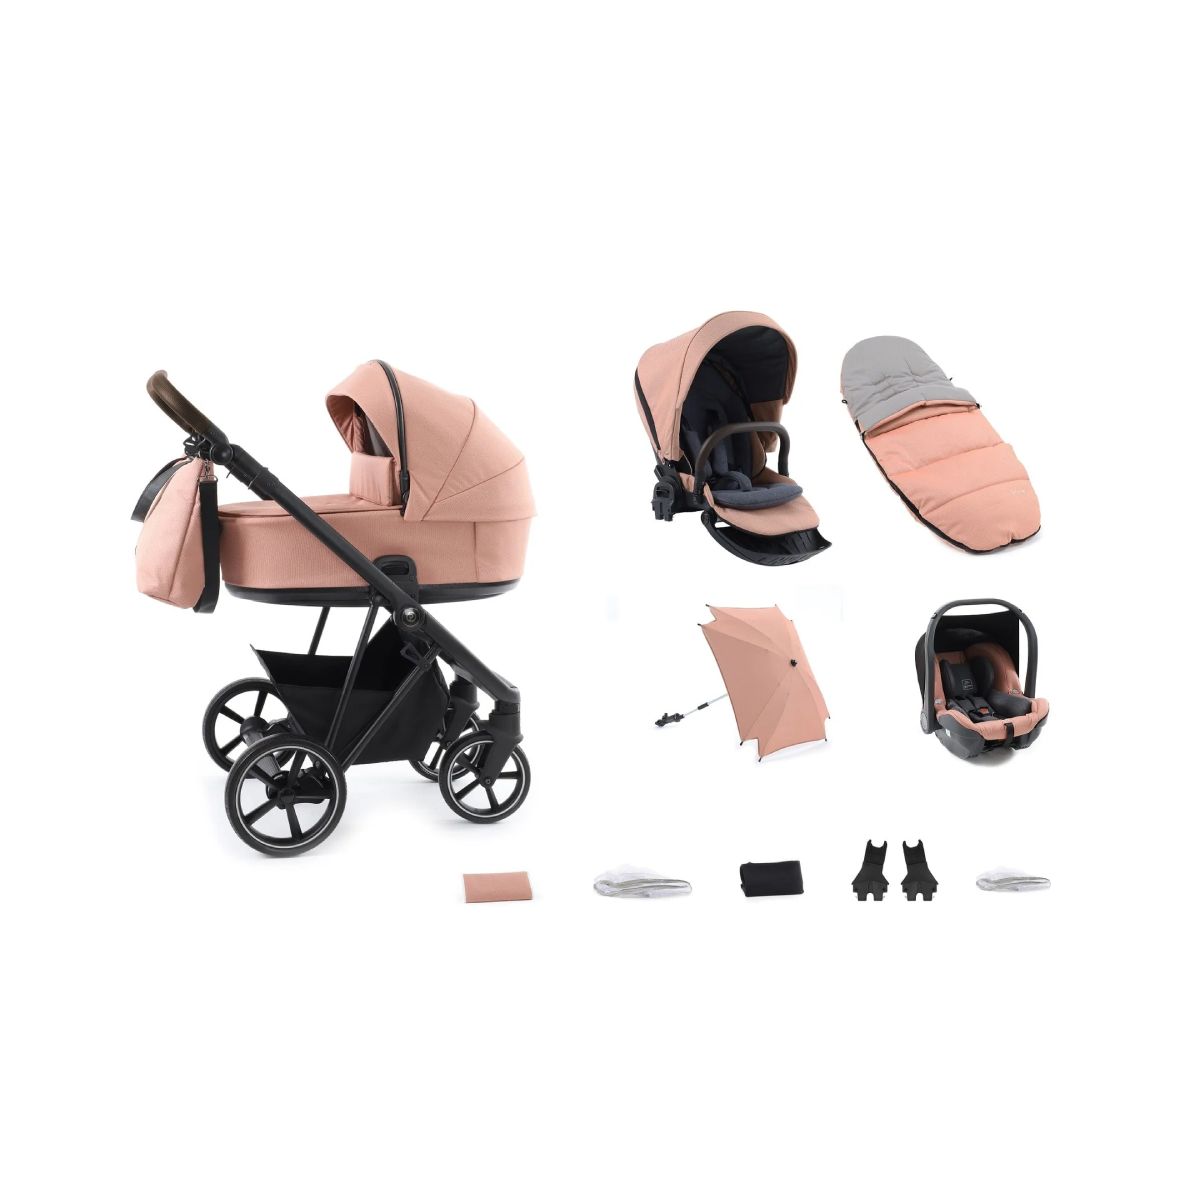 Babystyle Prestige with Vogue Chassis 12 Piece Bundle